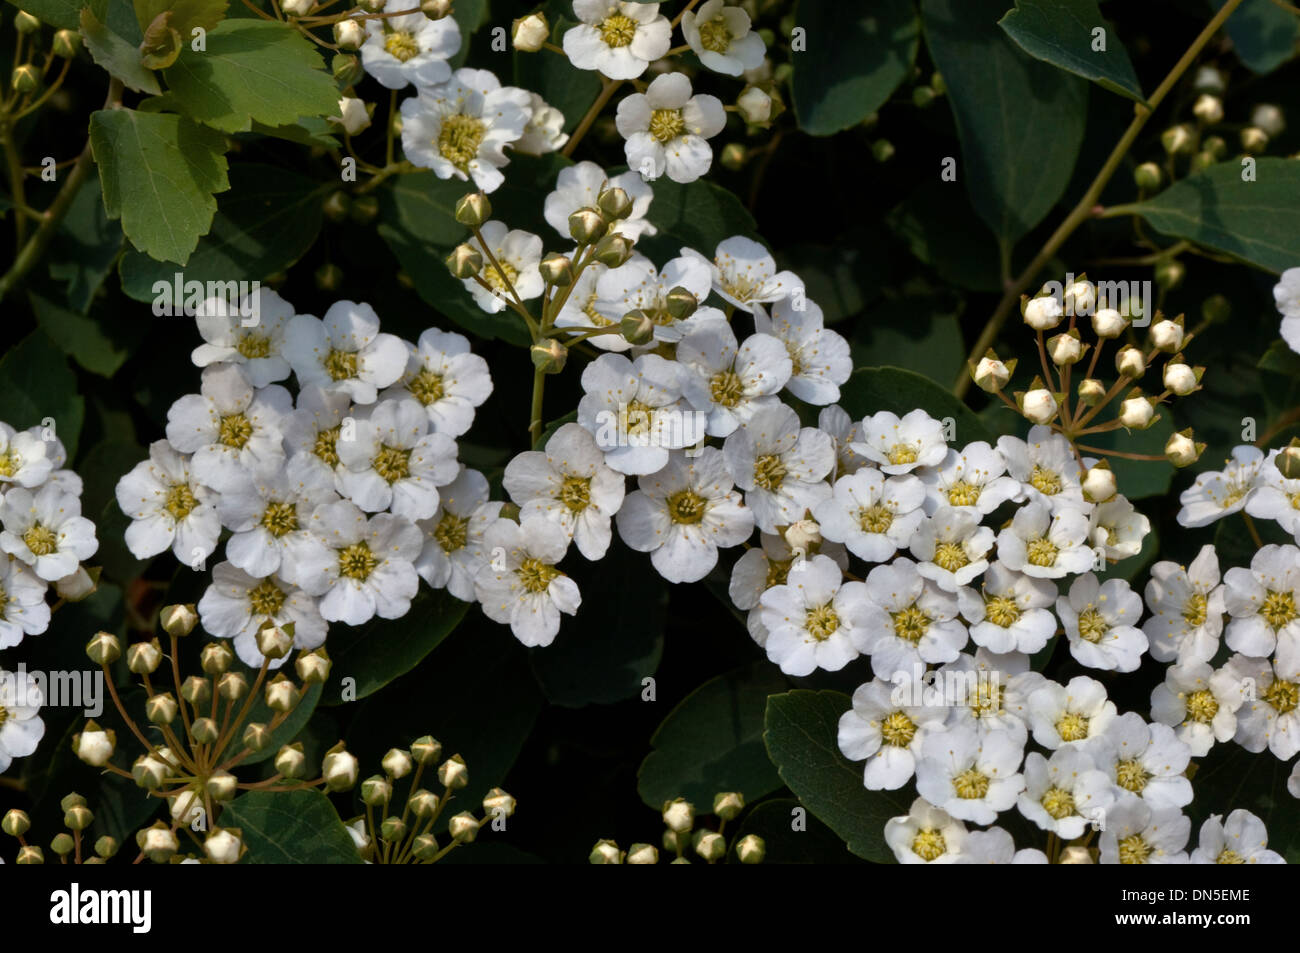 Tiny white bridals wreath flowers, Spiraea, blooming on the shrub in early spring. Stock Photo